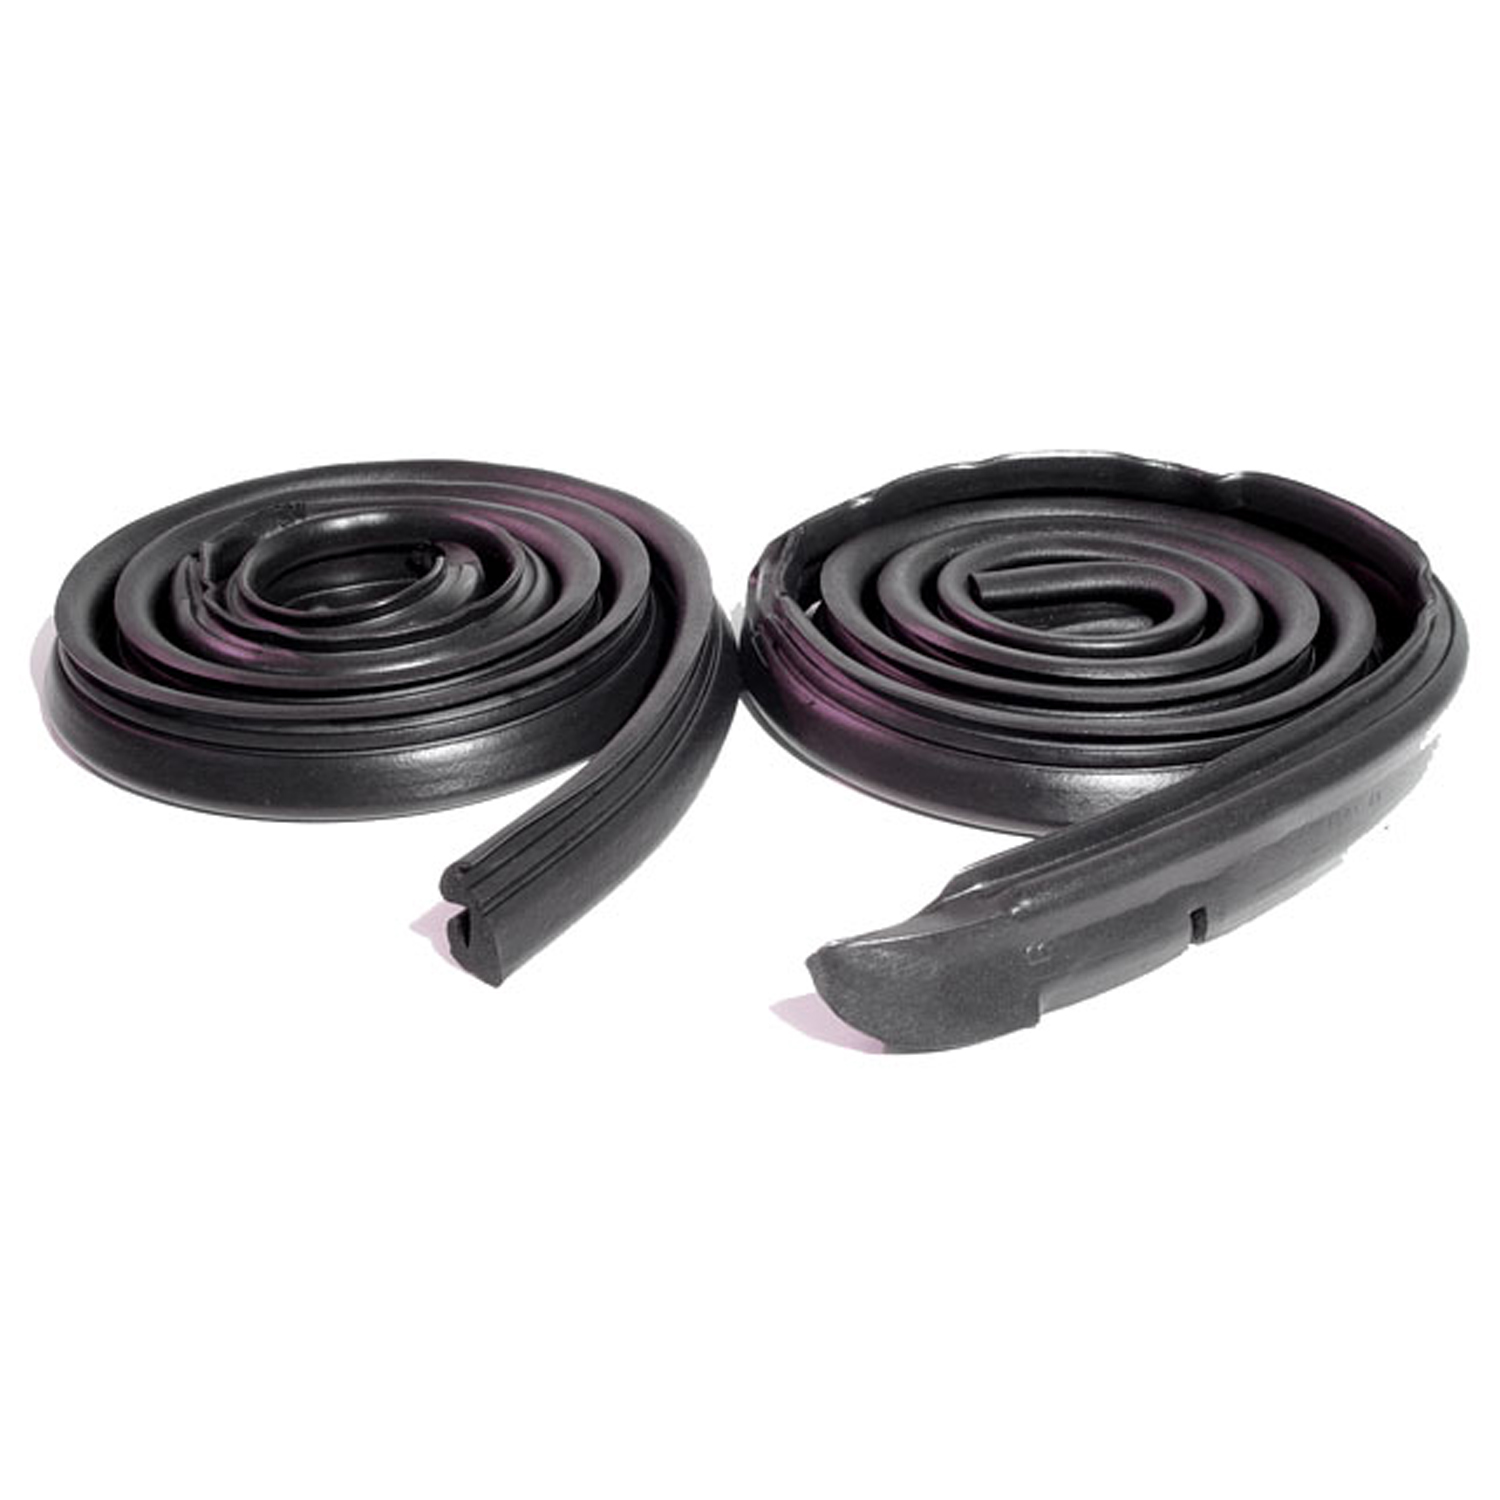 1966 Dodge Polara Molded Roof Rail Seals, for 2-Door Hardtop without Post-RR 4001-C